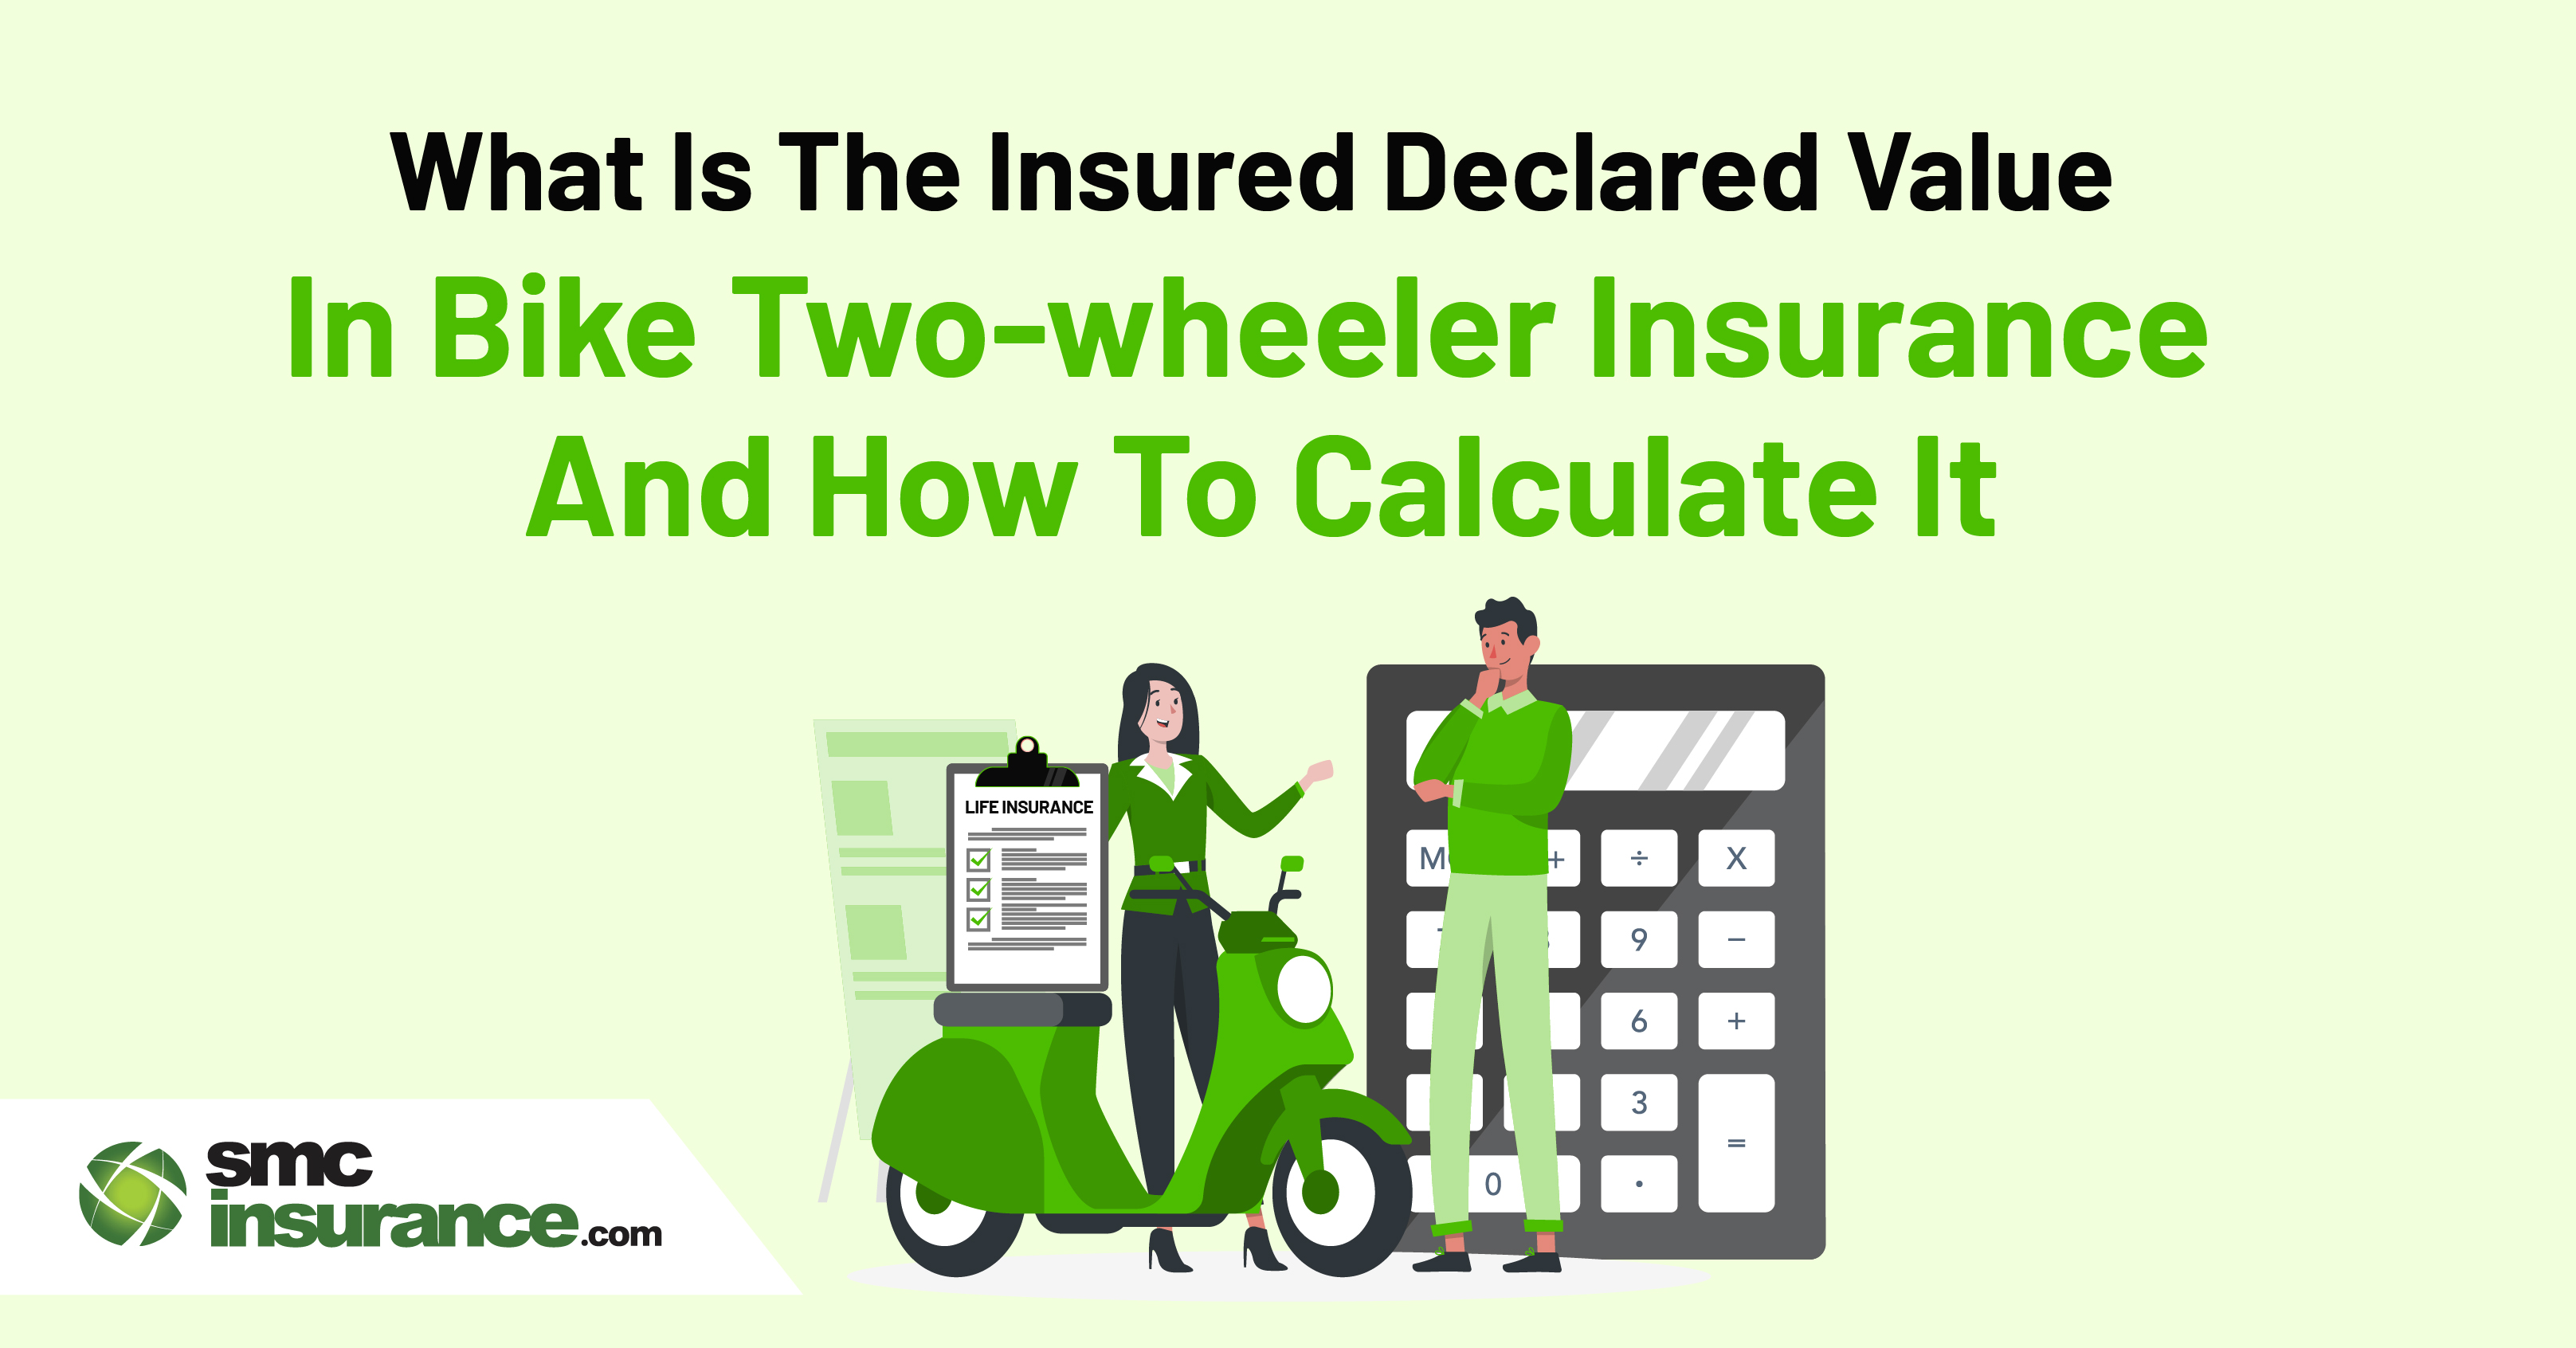 What Is The Insured Declared Value (IDV) In Bike/Two-wheeler Insurance And How To Calculate It?